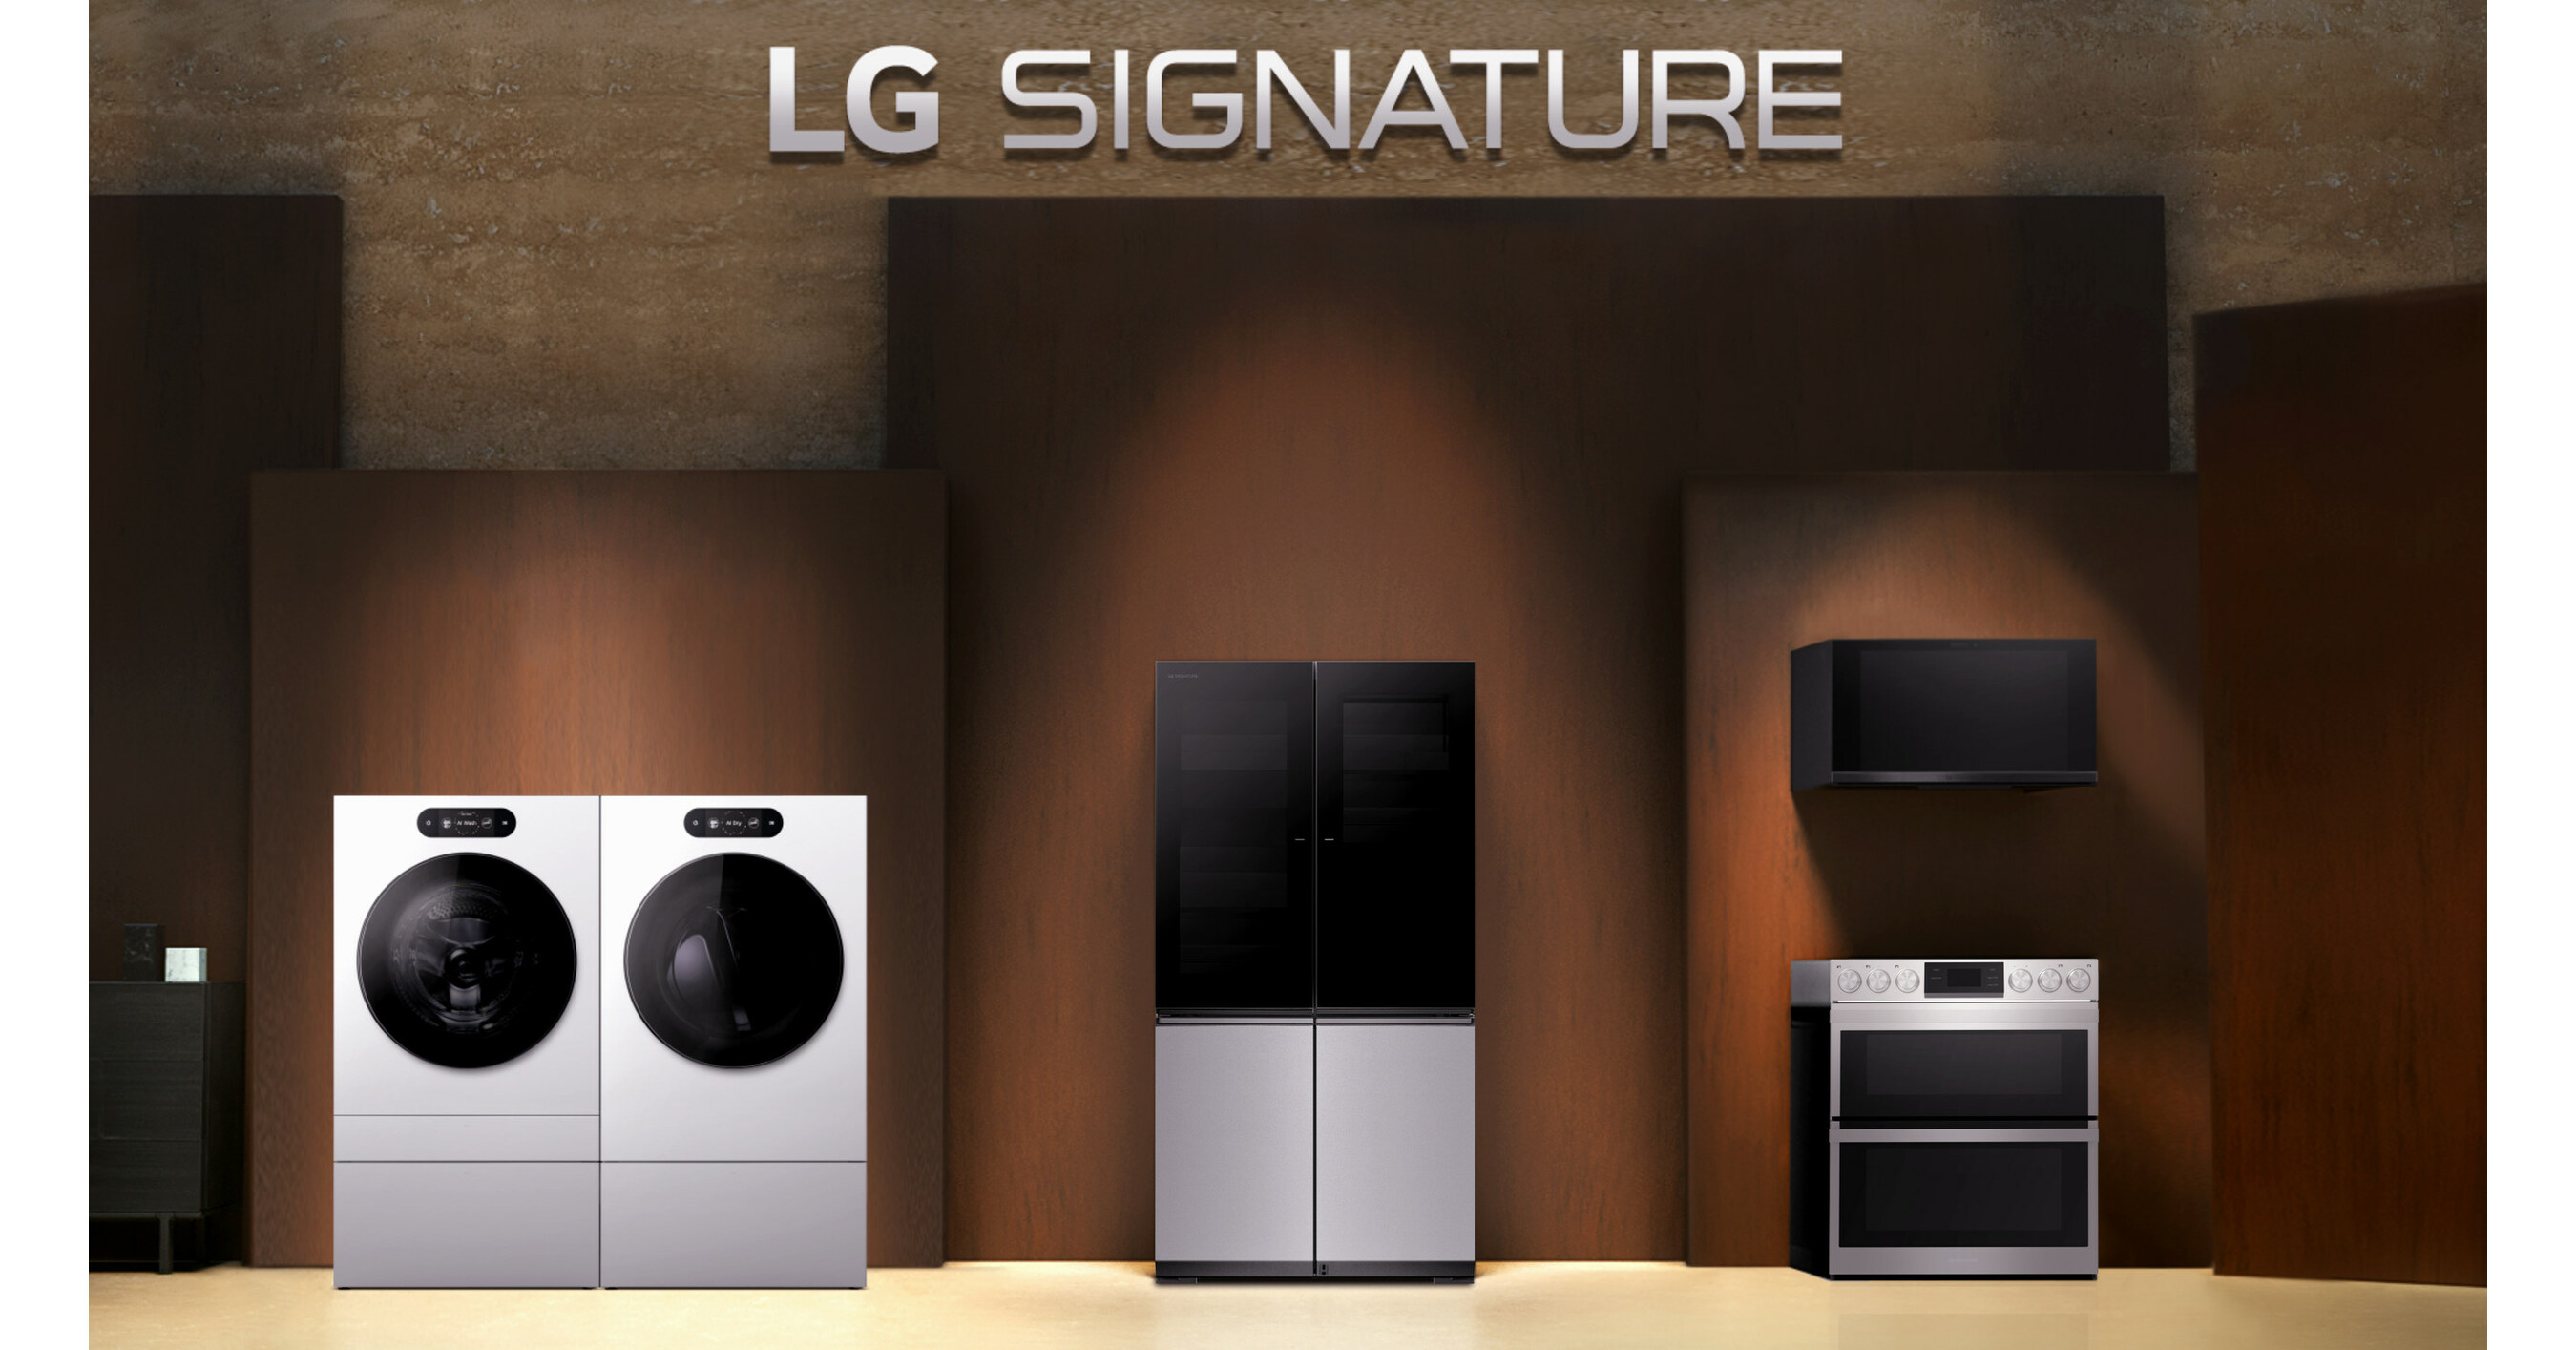 LG PRESENTS DIFFERENTIATED LUXURY EXPERIENCE WITH ITS SECOND-GENERATION LG SIGNATURE LINEUP AT CES 2023